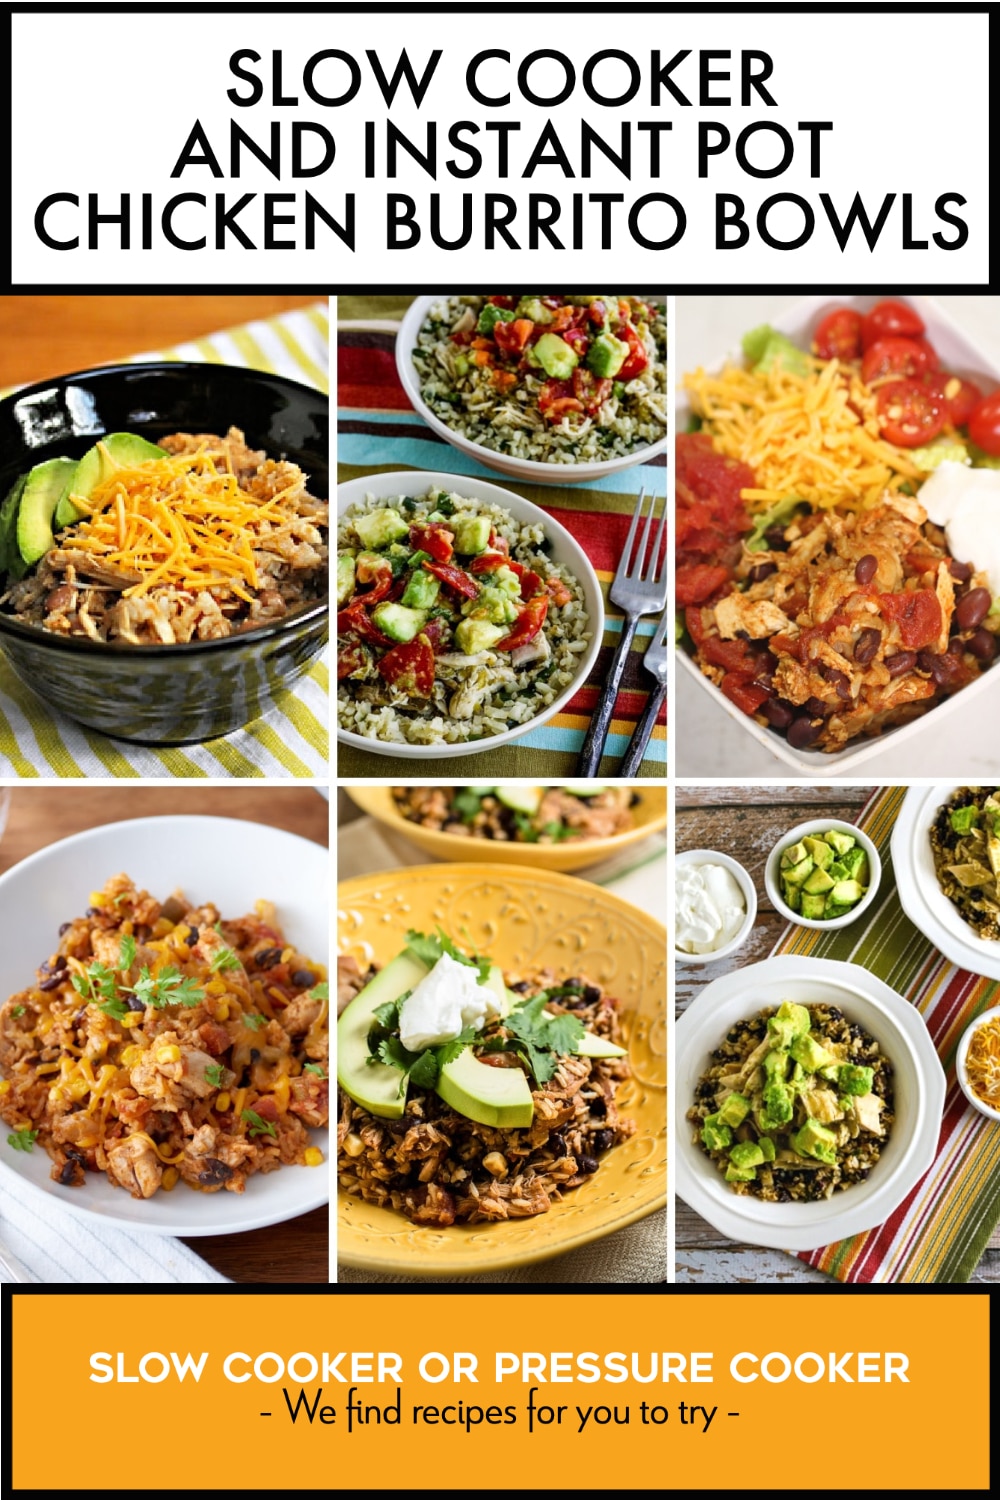 Pinterest image of Slow Cooker and Instant Pot Chicken Burrito Bowls